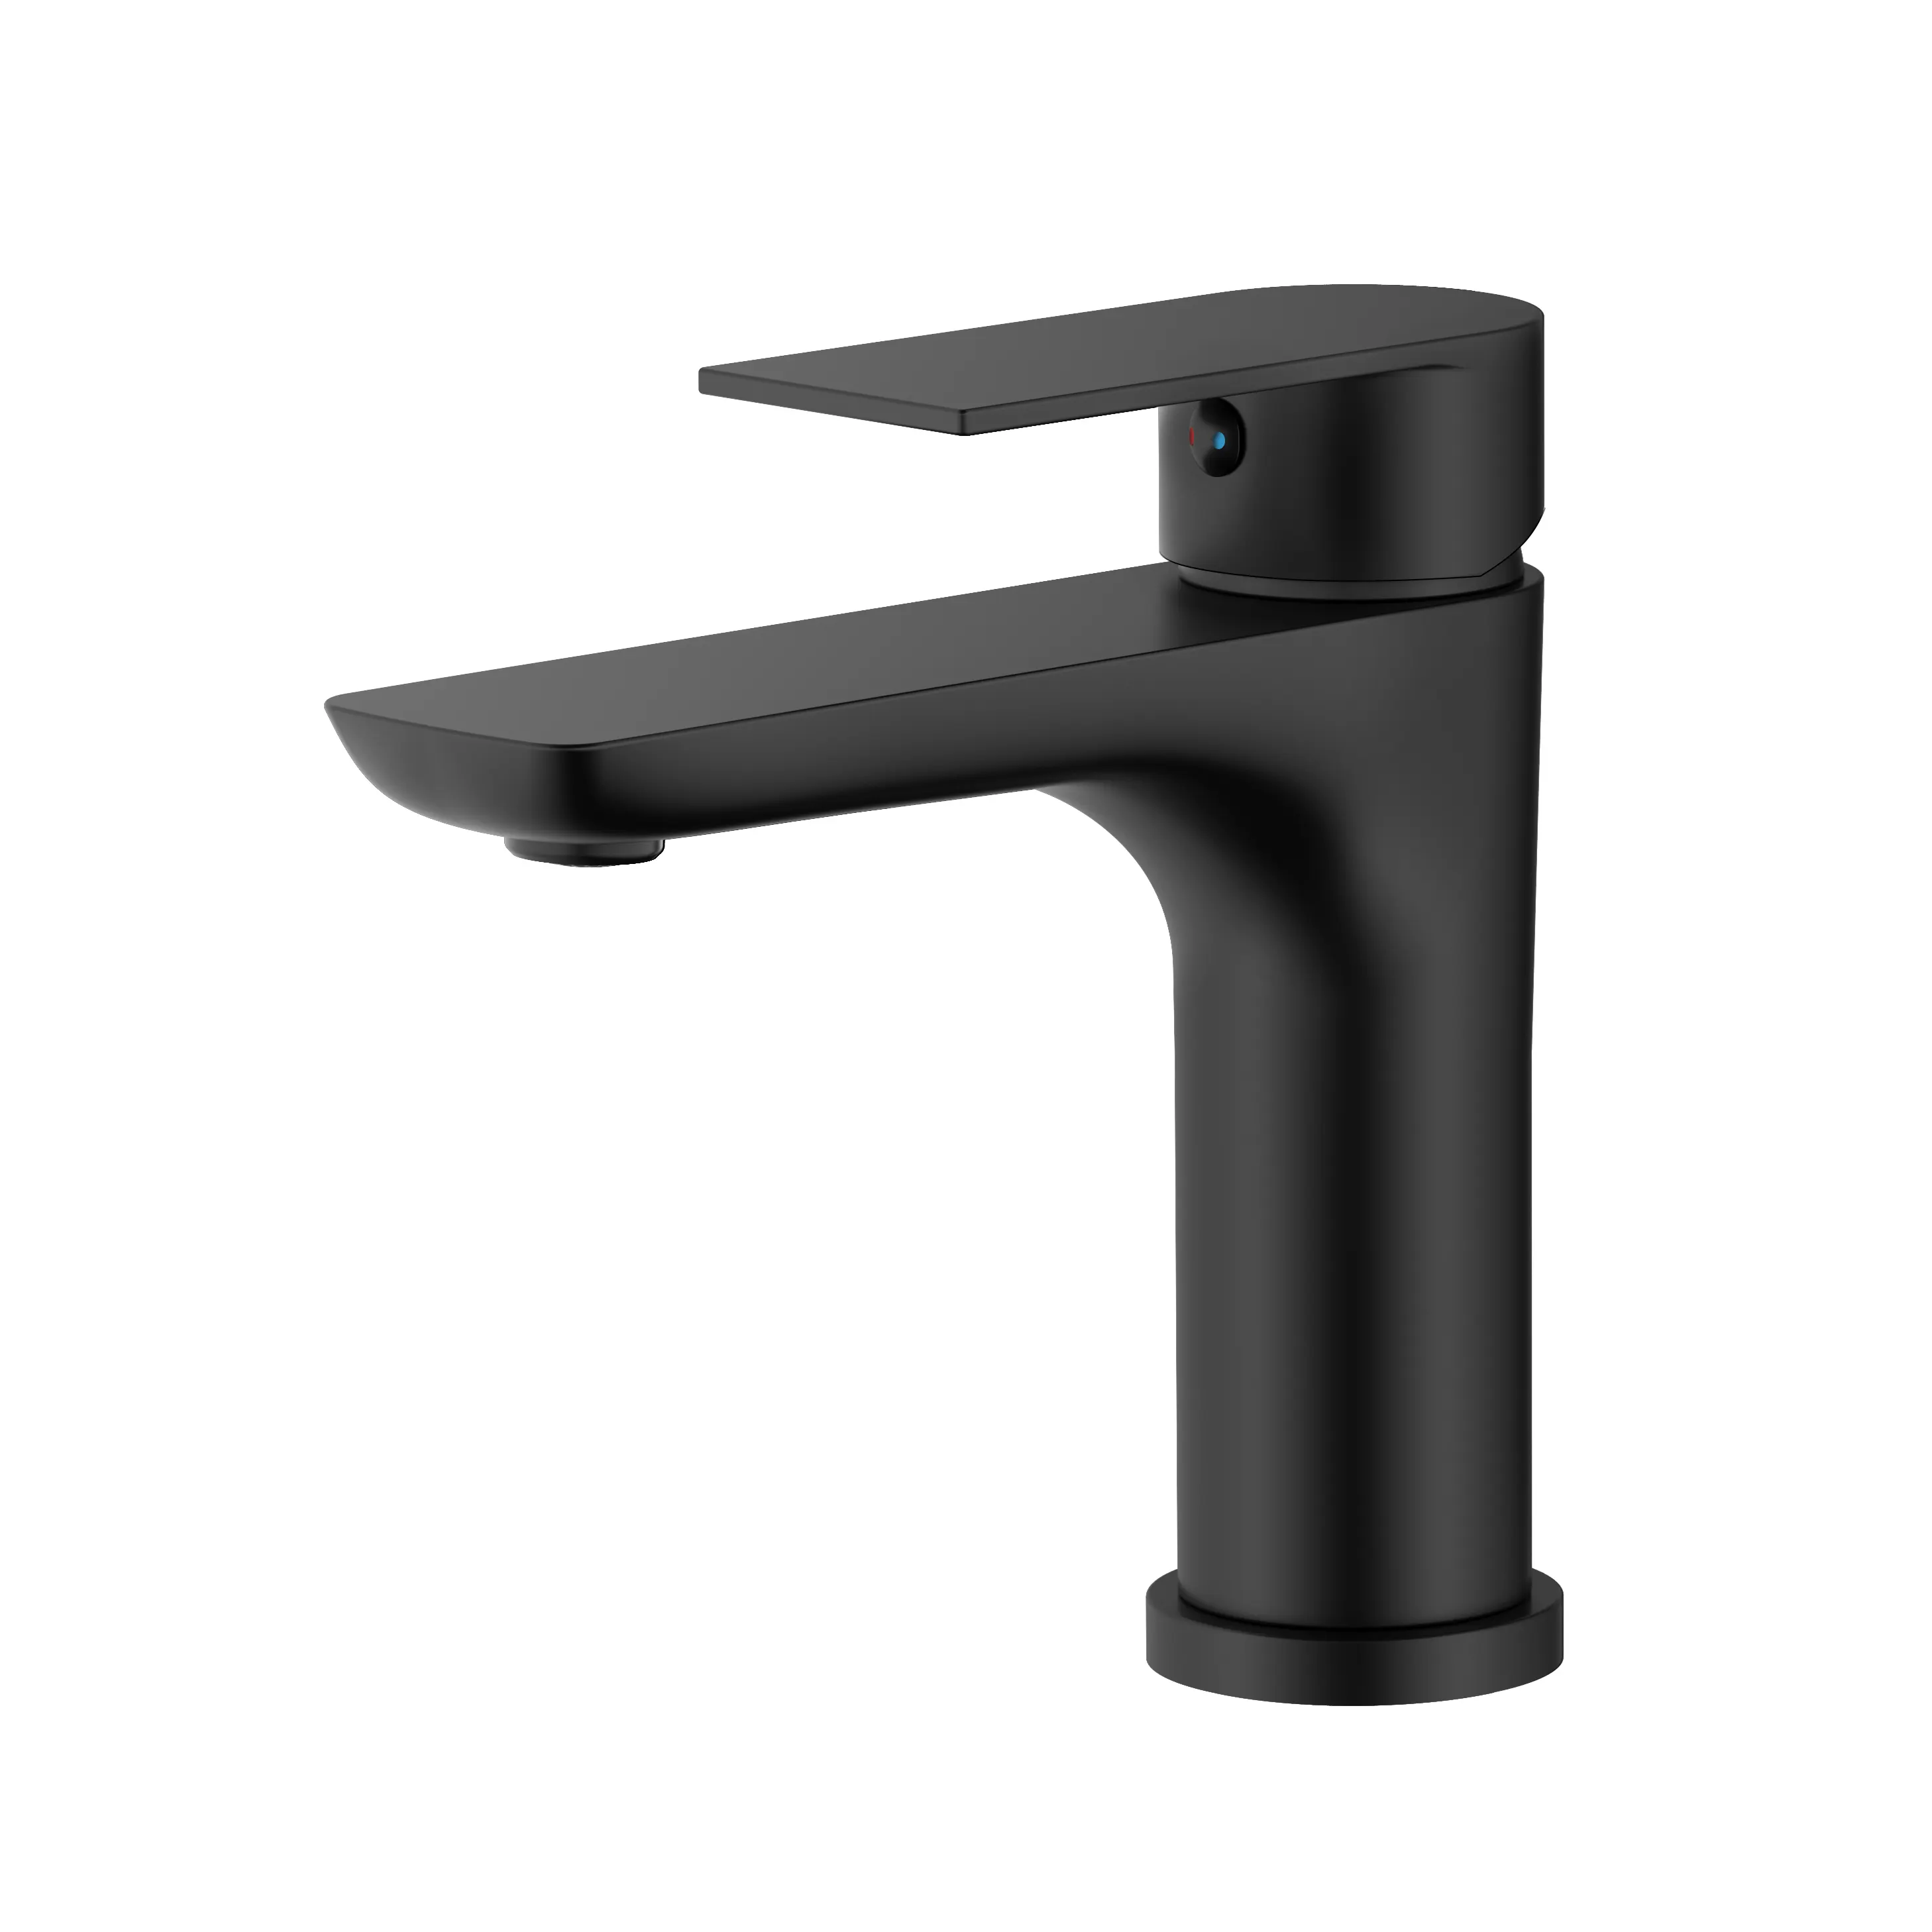 Modern black bathroom faucets hot and cold water basin mixers taps bathroom sink faucet bathroom